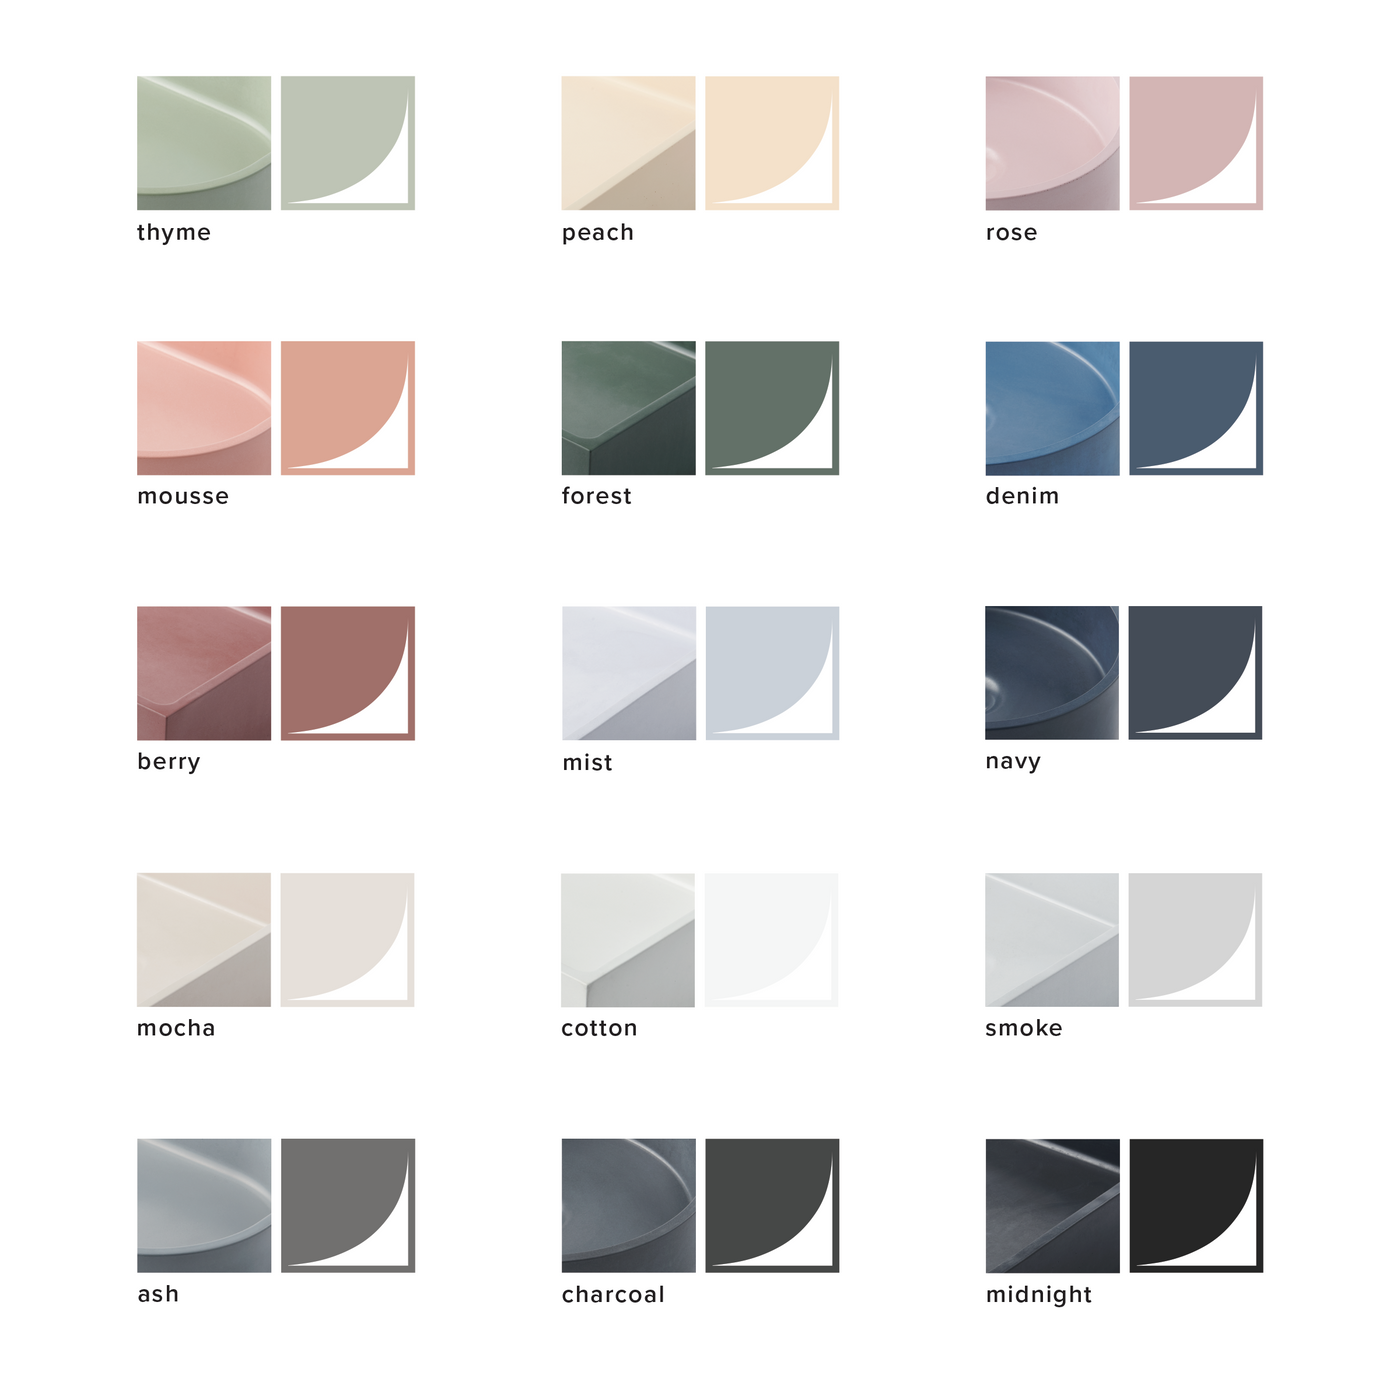 A bunch of different shades of different colors in mudd. concrete's Yarra Basin LG Affix.